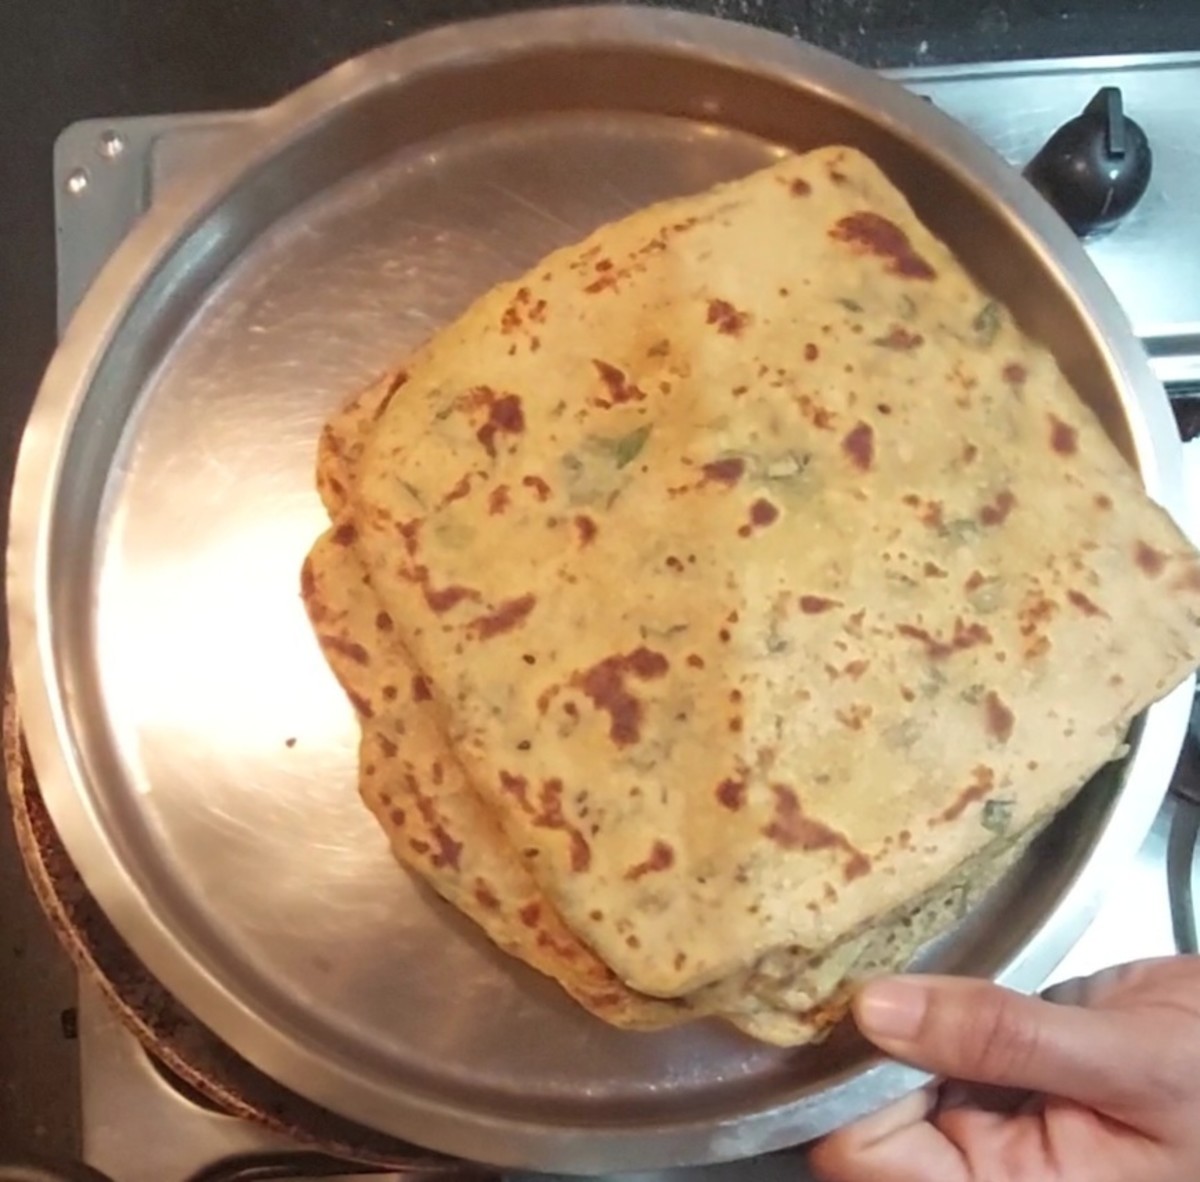 Repeat the same procedure and make more parathas using the remaining dough.